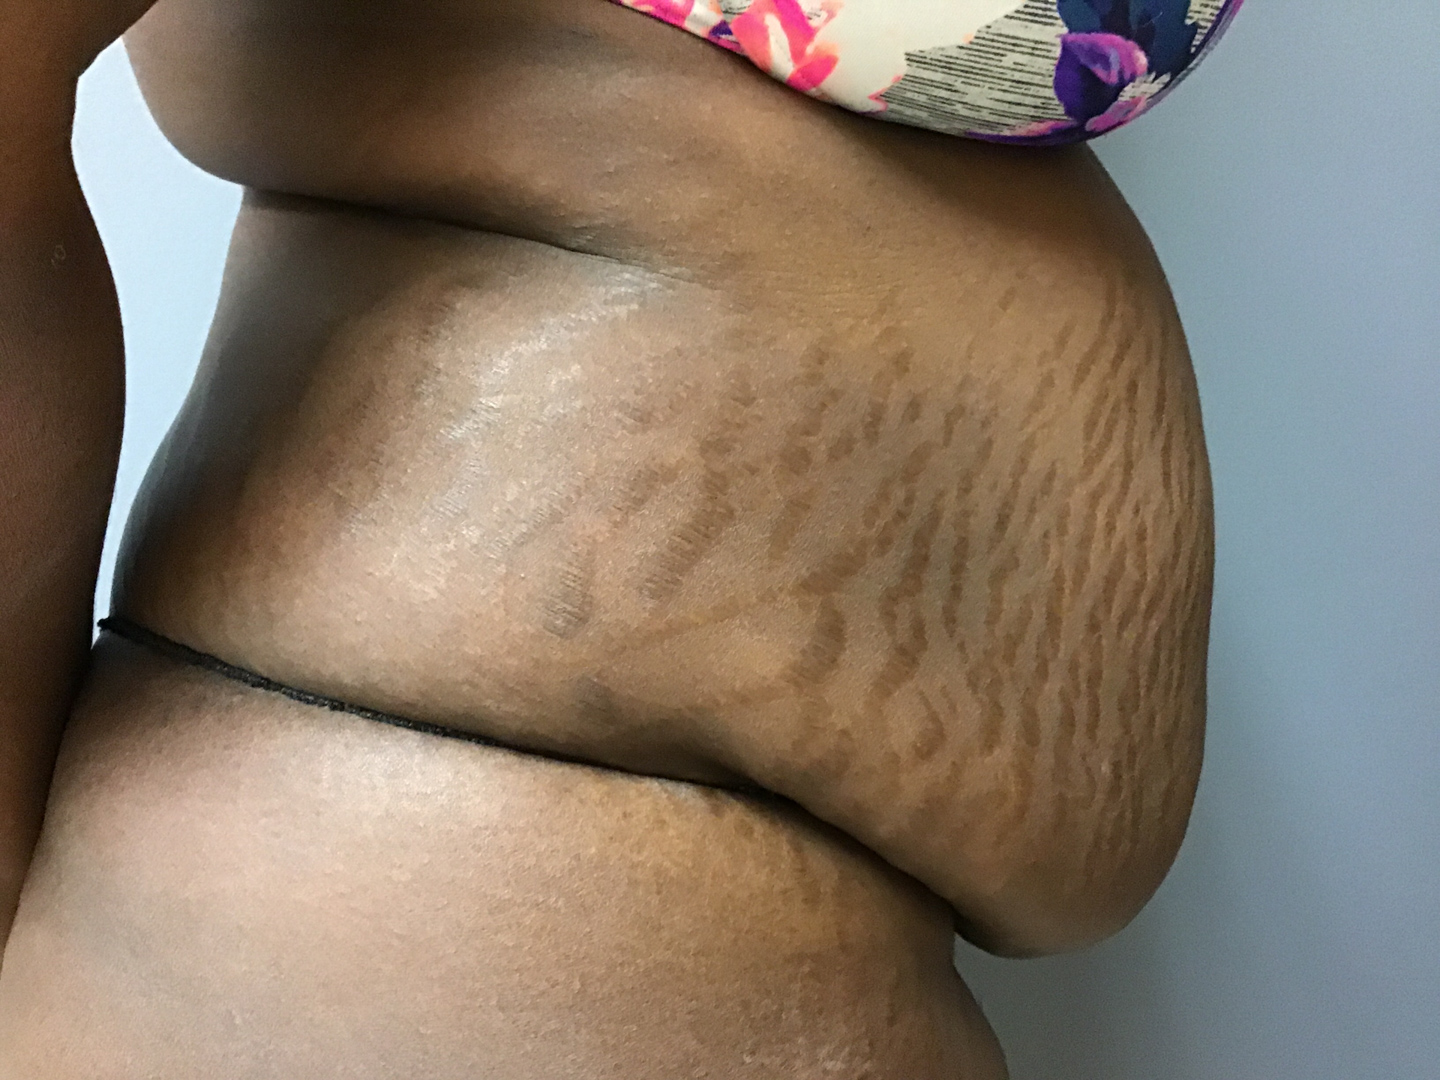 32 year old female right side before surgery